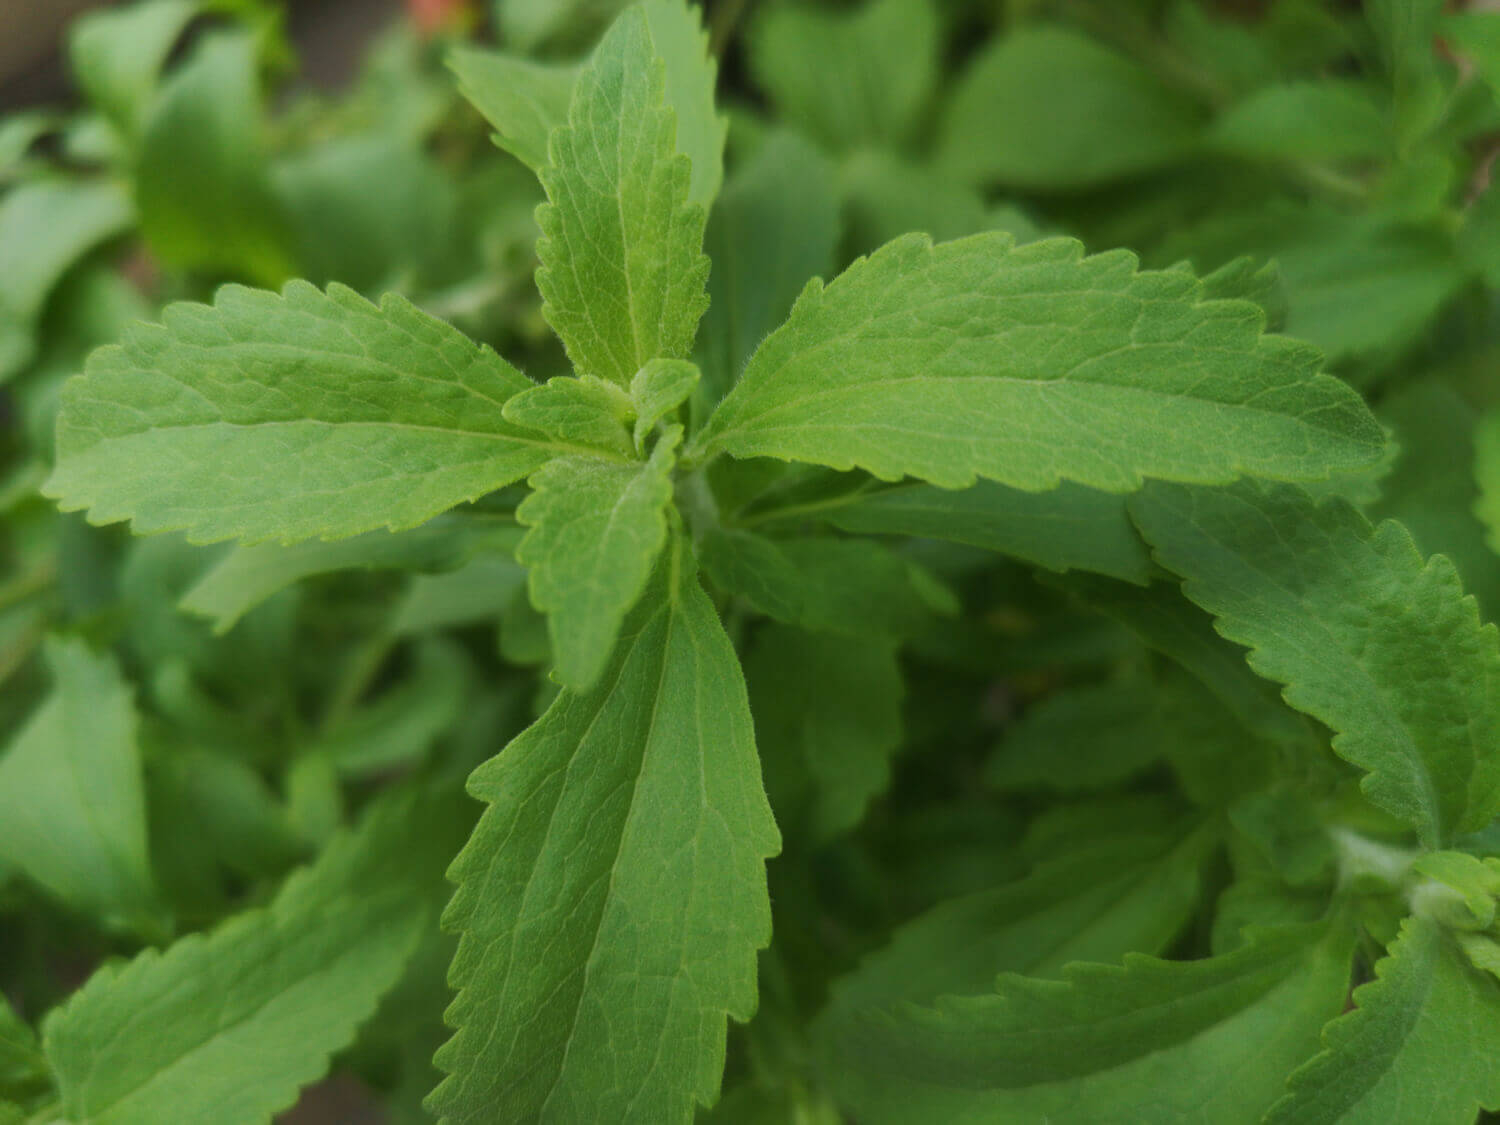 Stevia Plant | What is Stevia - Information about Stevia